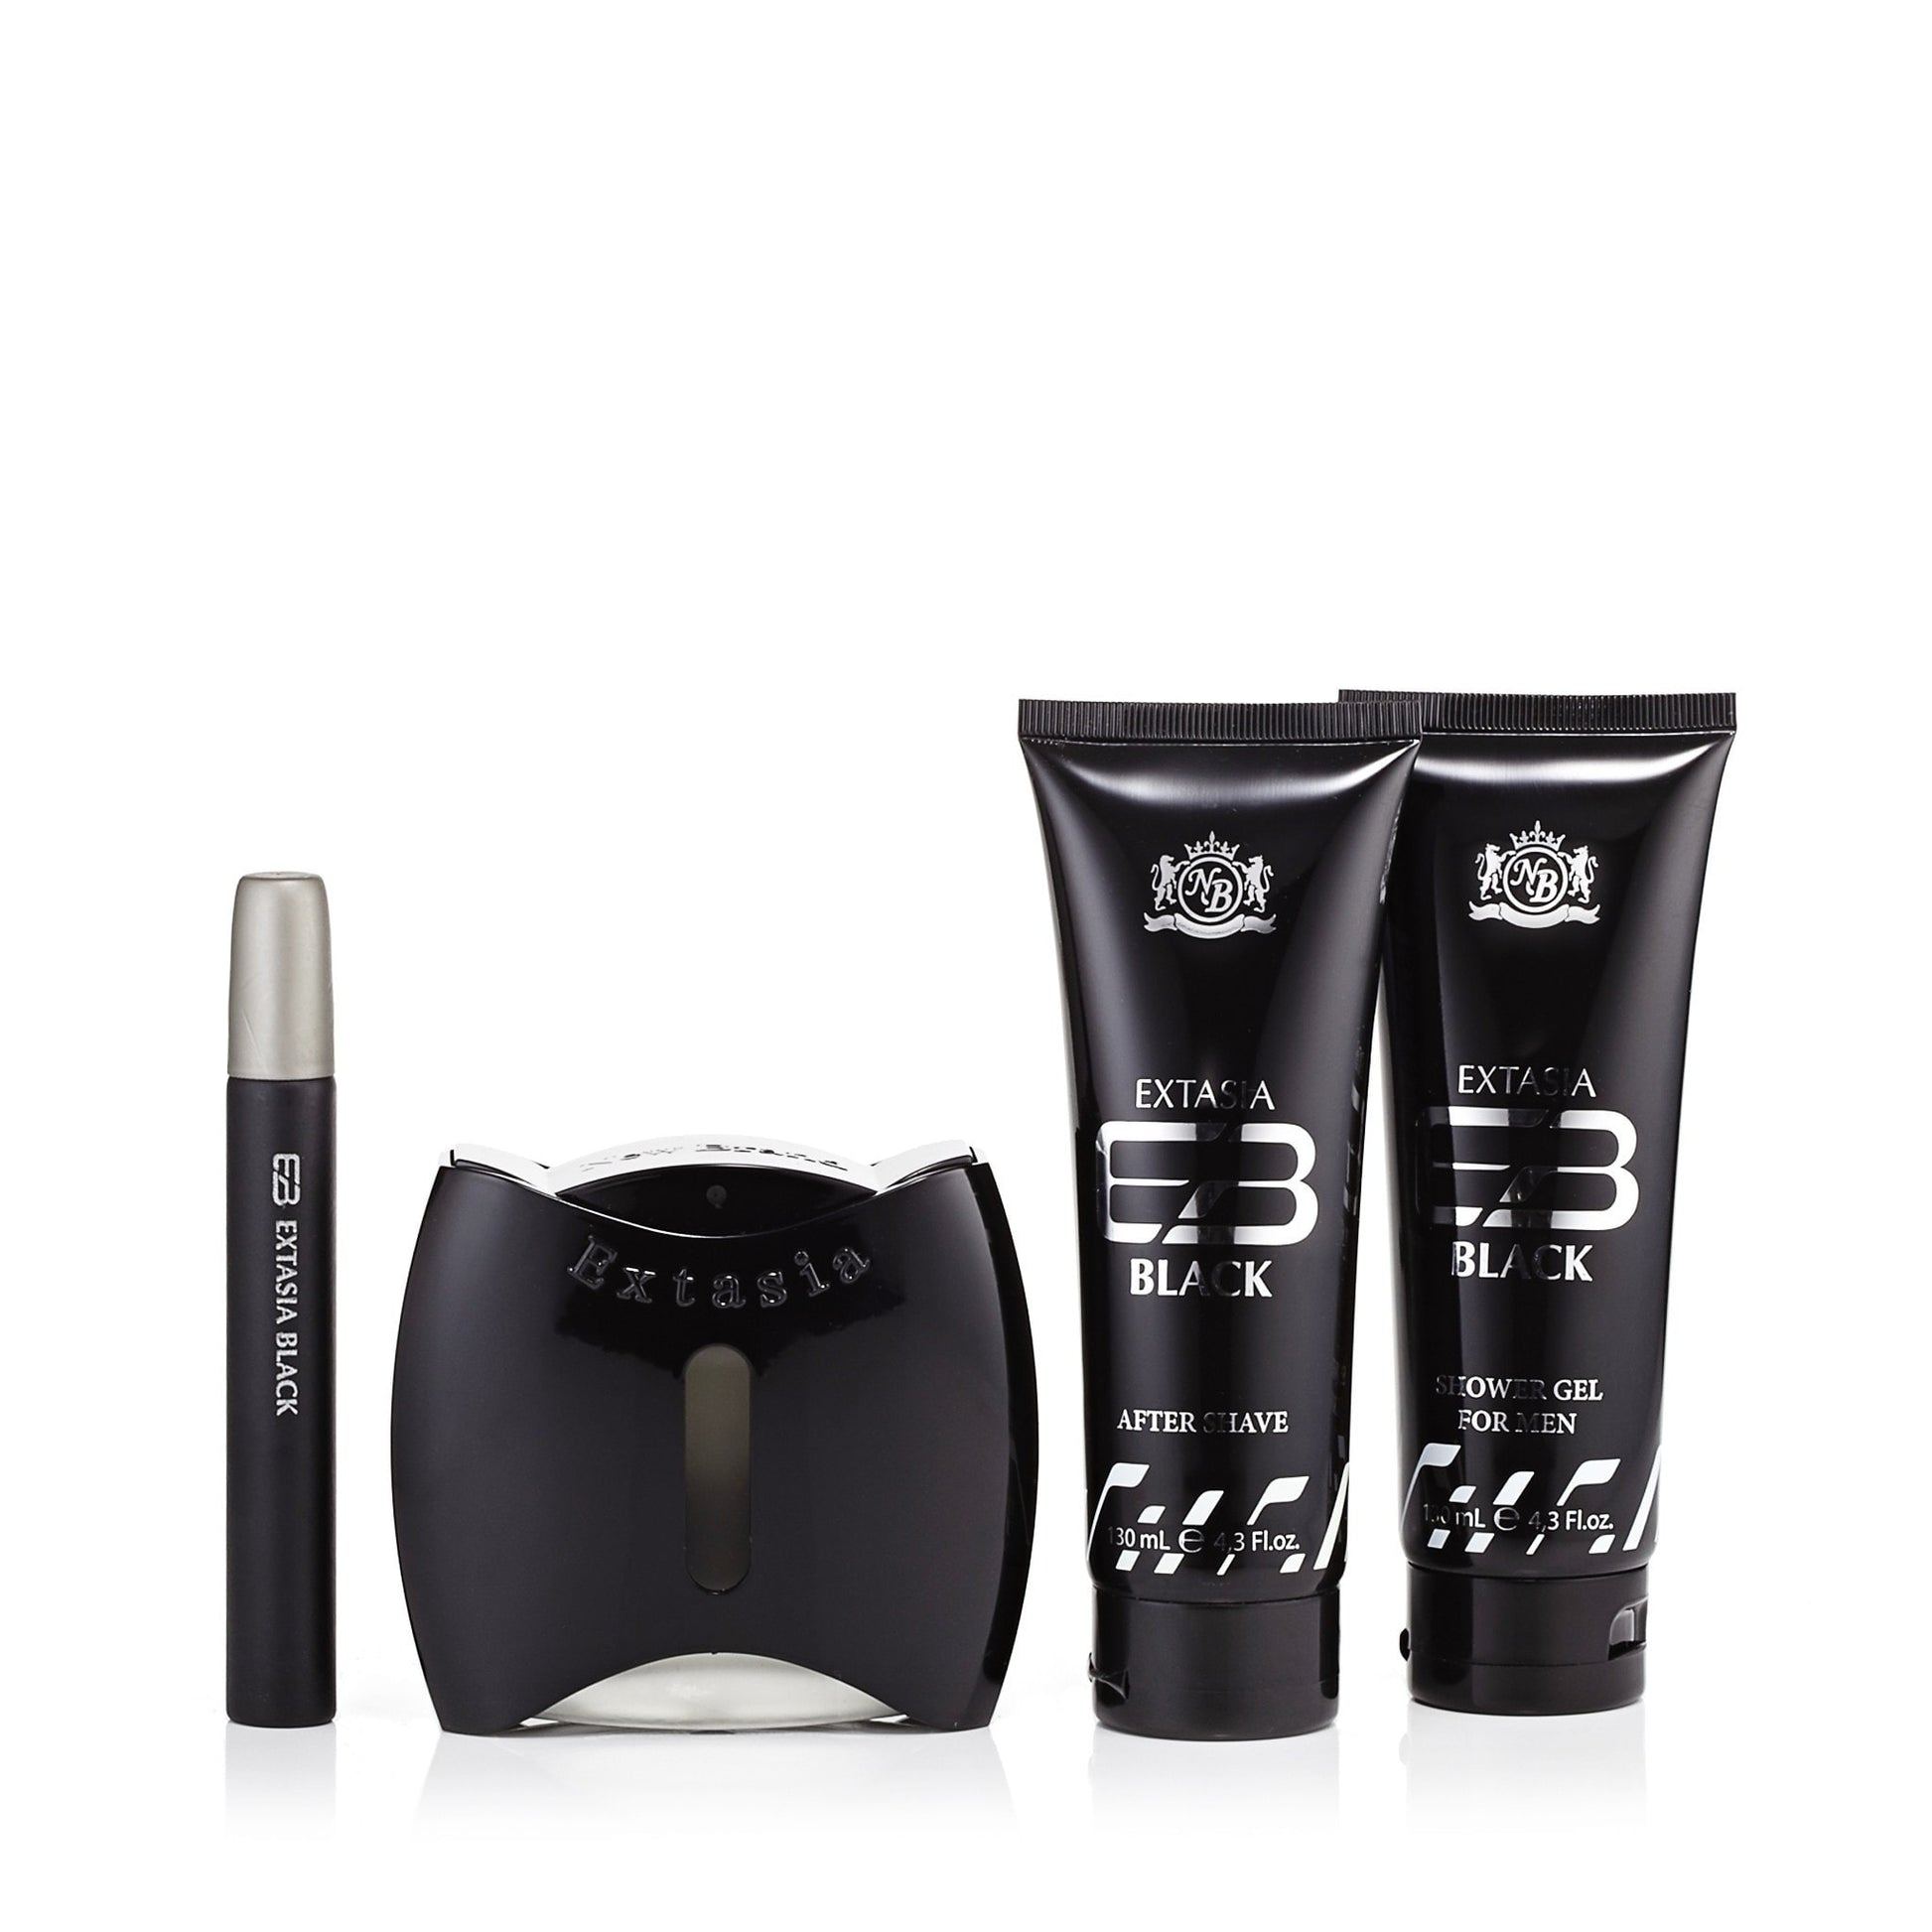 Exclusive Selection Extasia Black Gift Set Mens 3.3 oz. Click to open in modal